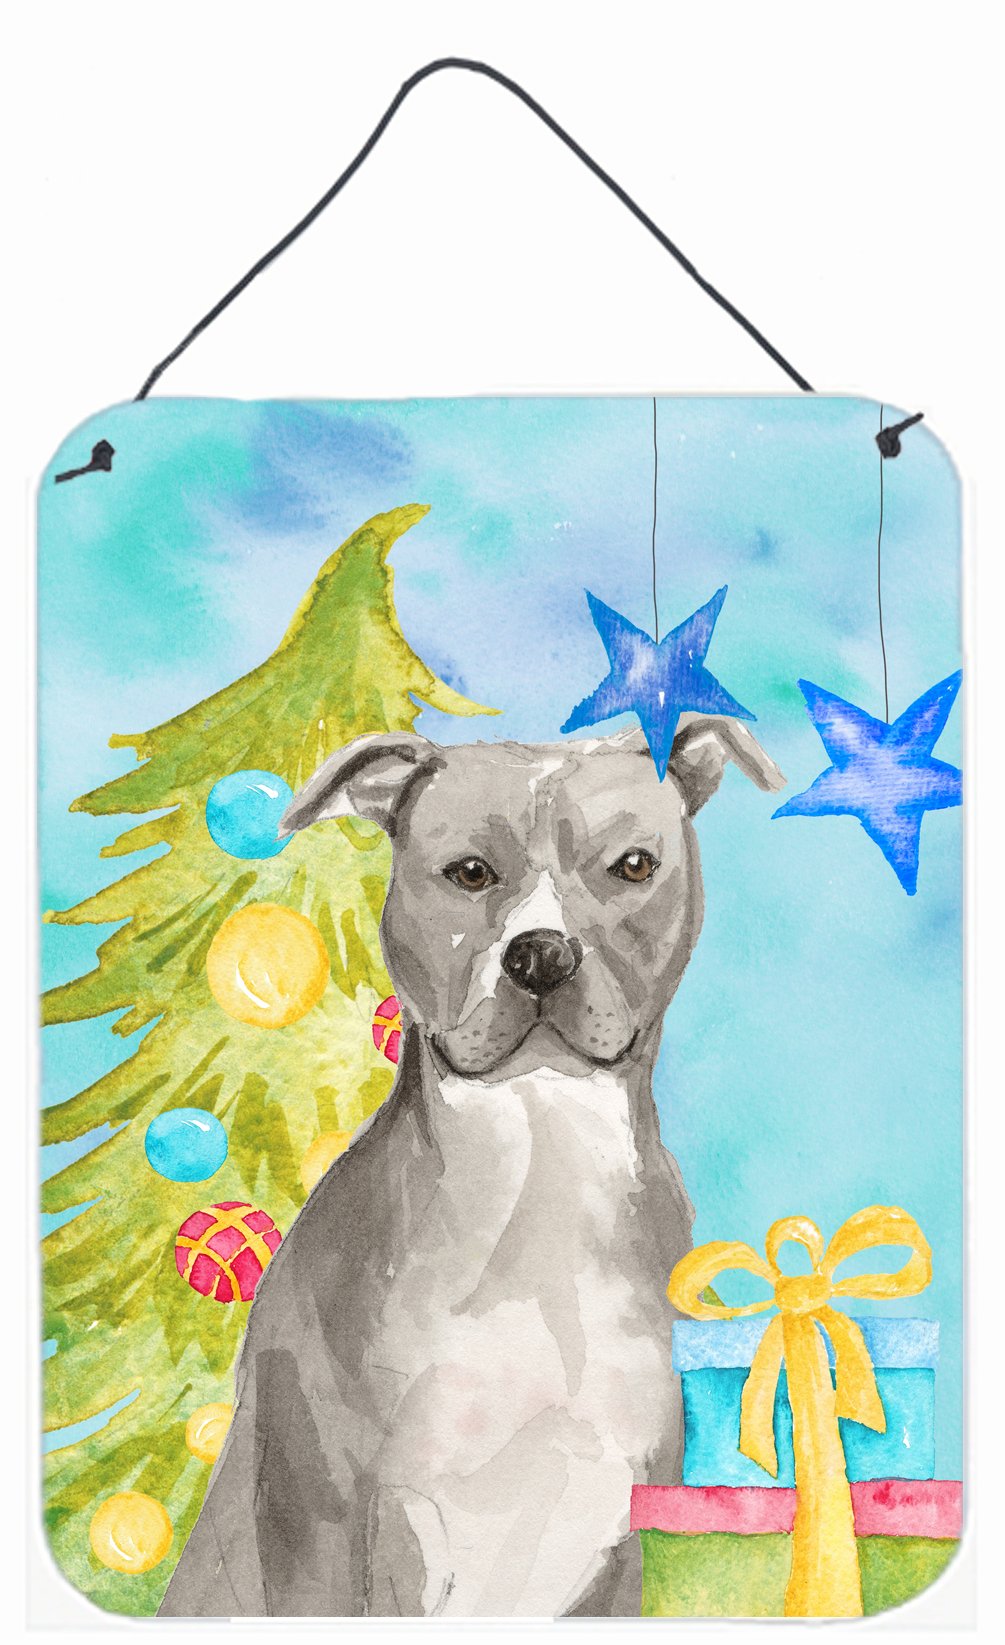 Staffordshire Bull Terrier Christmas Wall or Door Hanging Prints BB9395DS1216 by Caroline's Treasures